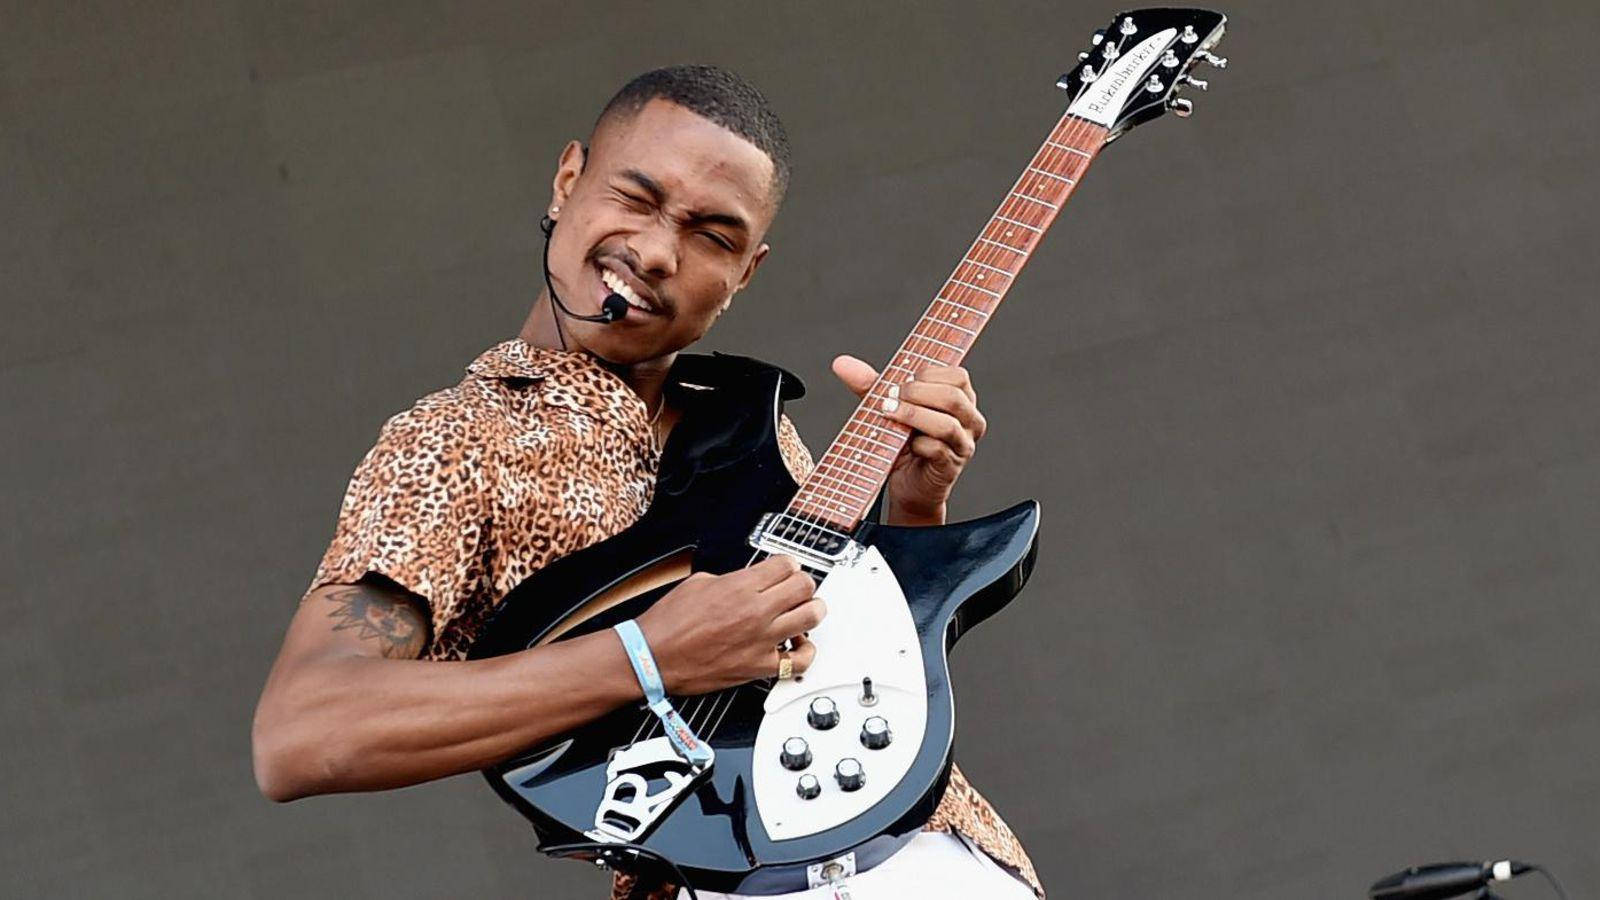 Steve Lacy mesmerizes with electrifying guitar performance Wallpaper